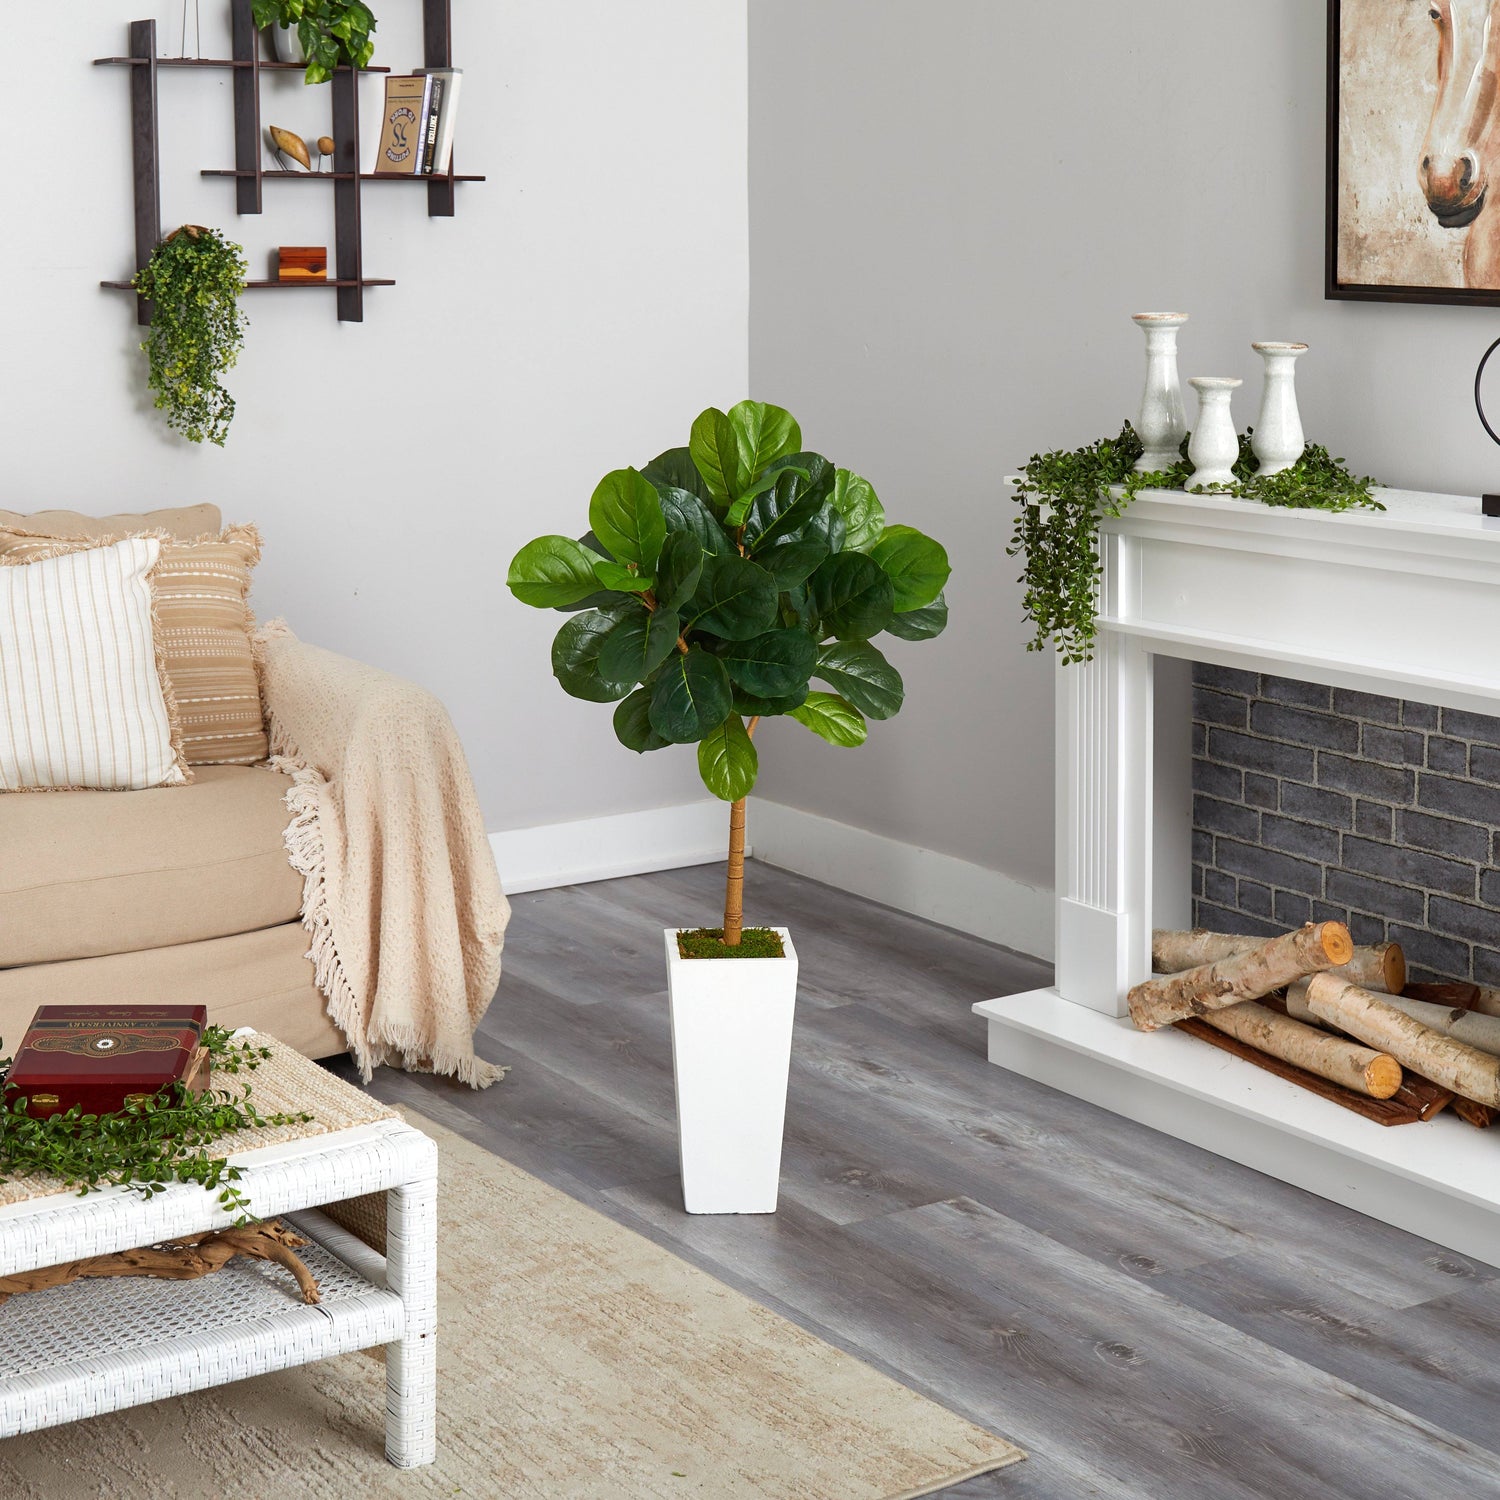 4’ Fiddle Leaf Artificial Tree in White Tower Planter